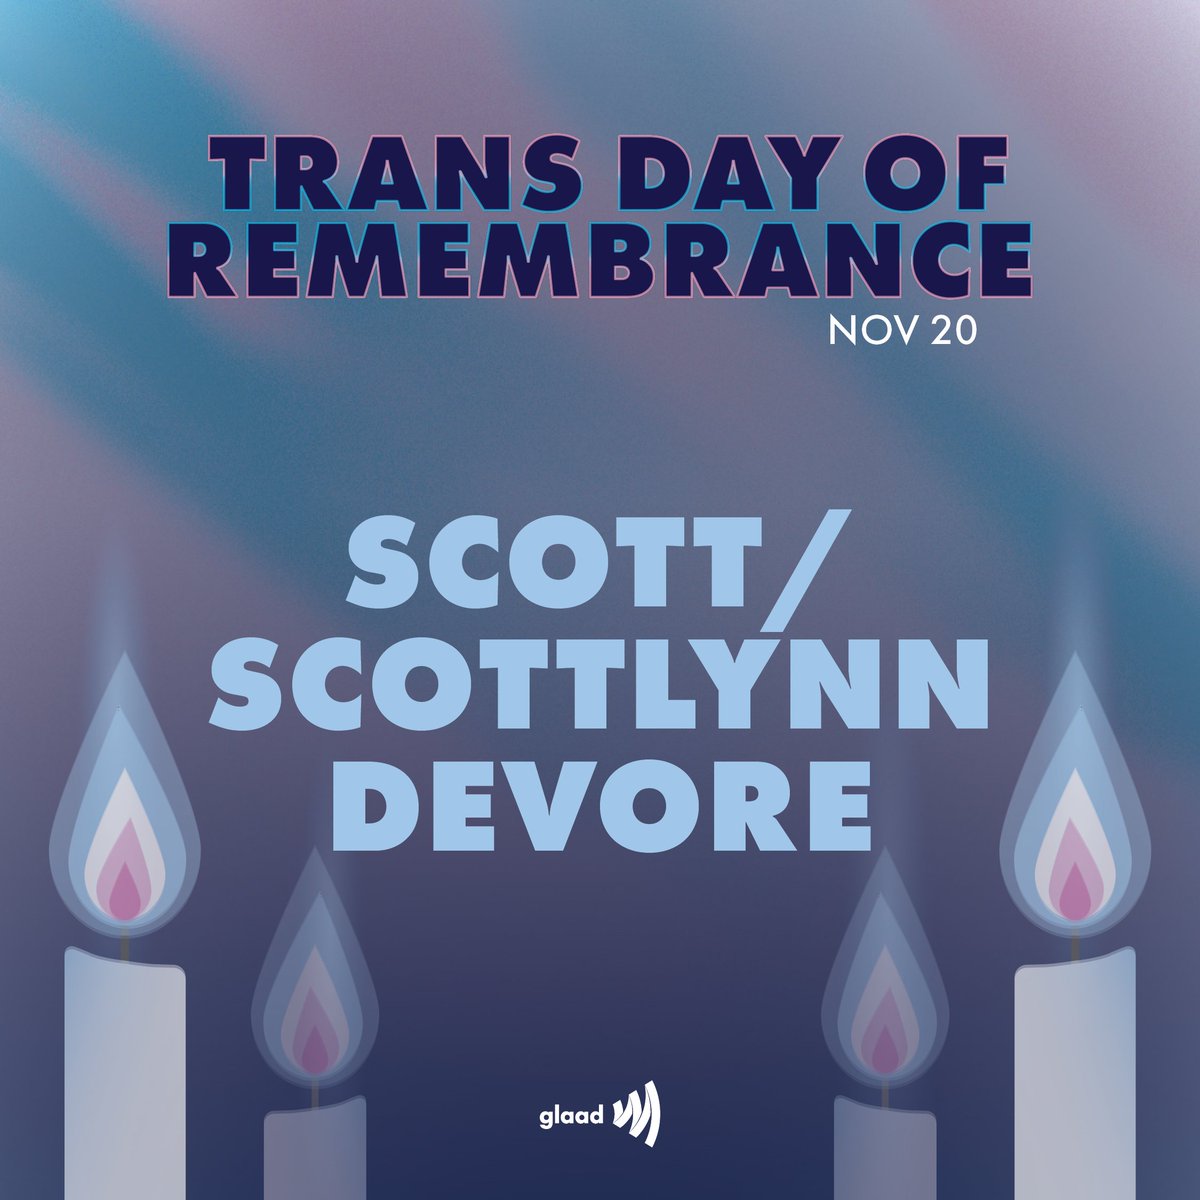 Scott DeVore, also known as Scottlynn Kelly DeVore, a gender non-conforming person, was killed in Augusta, Georgia. They were 51 years old. DeVore is remembered as being “sweet” and “beautiful” by their friends.